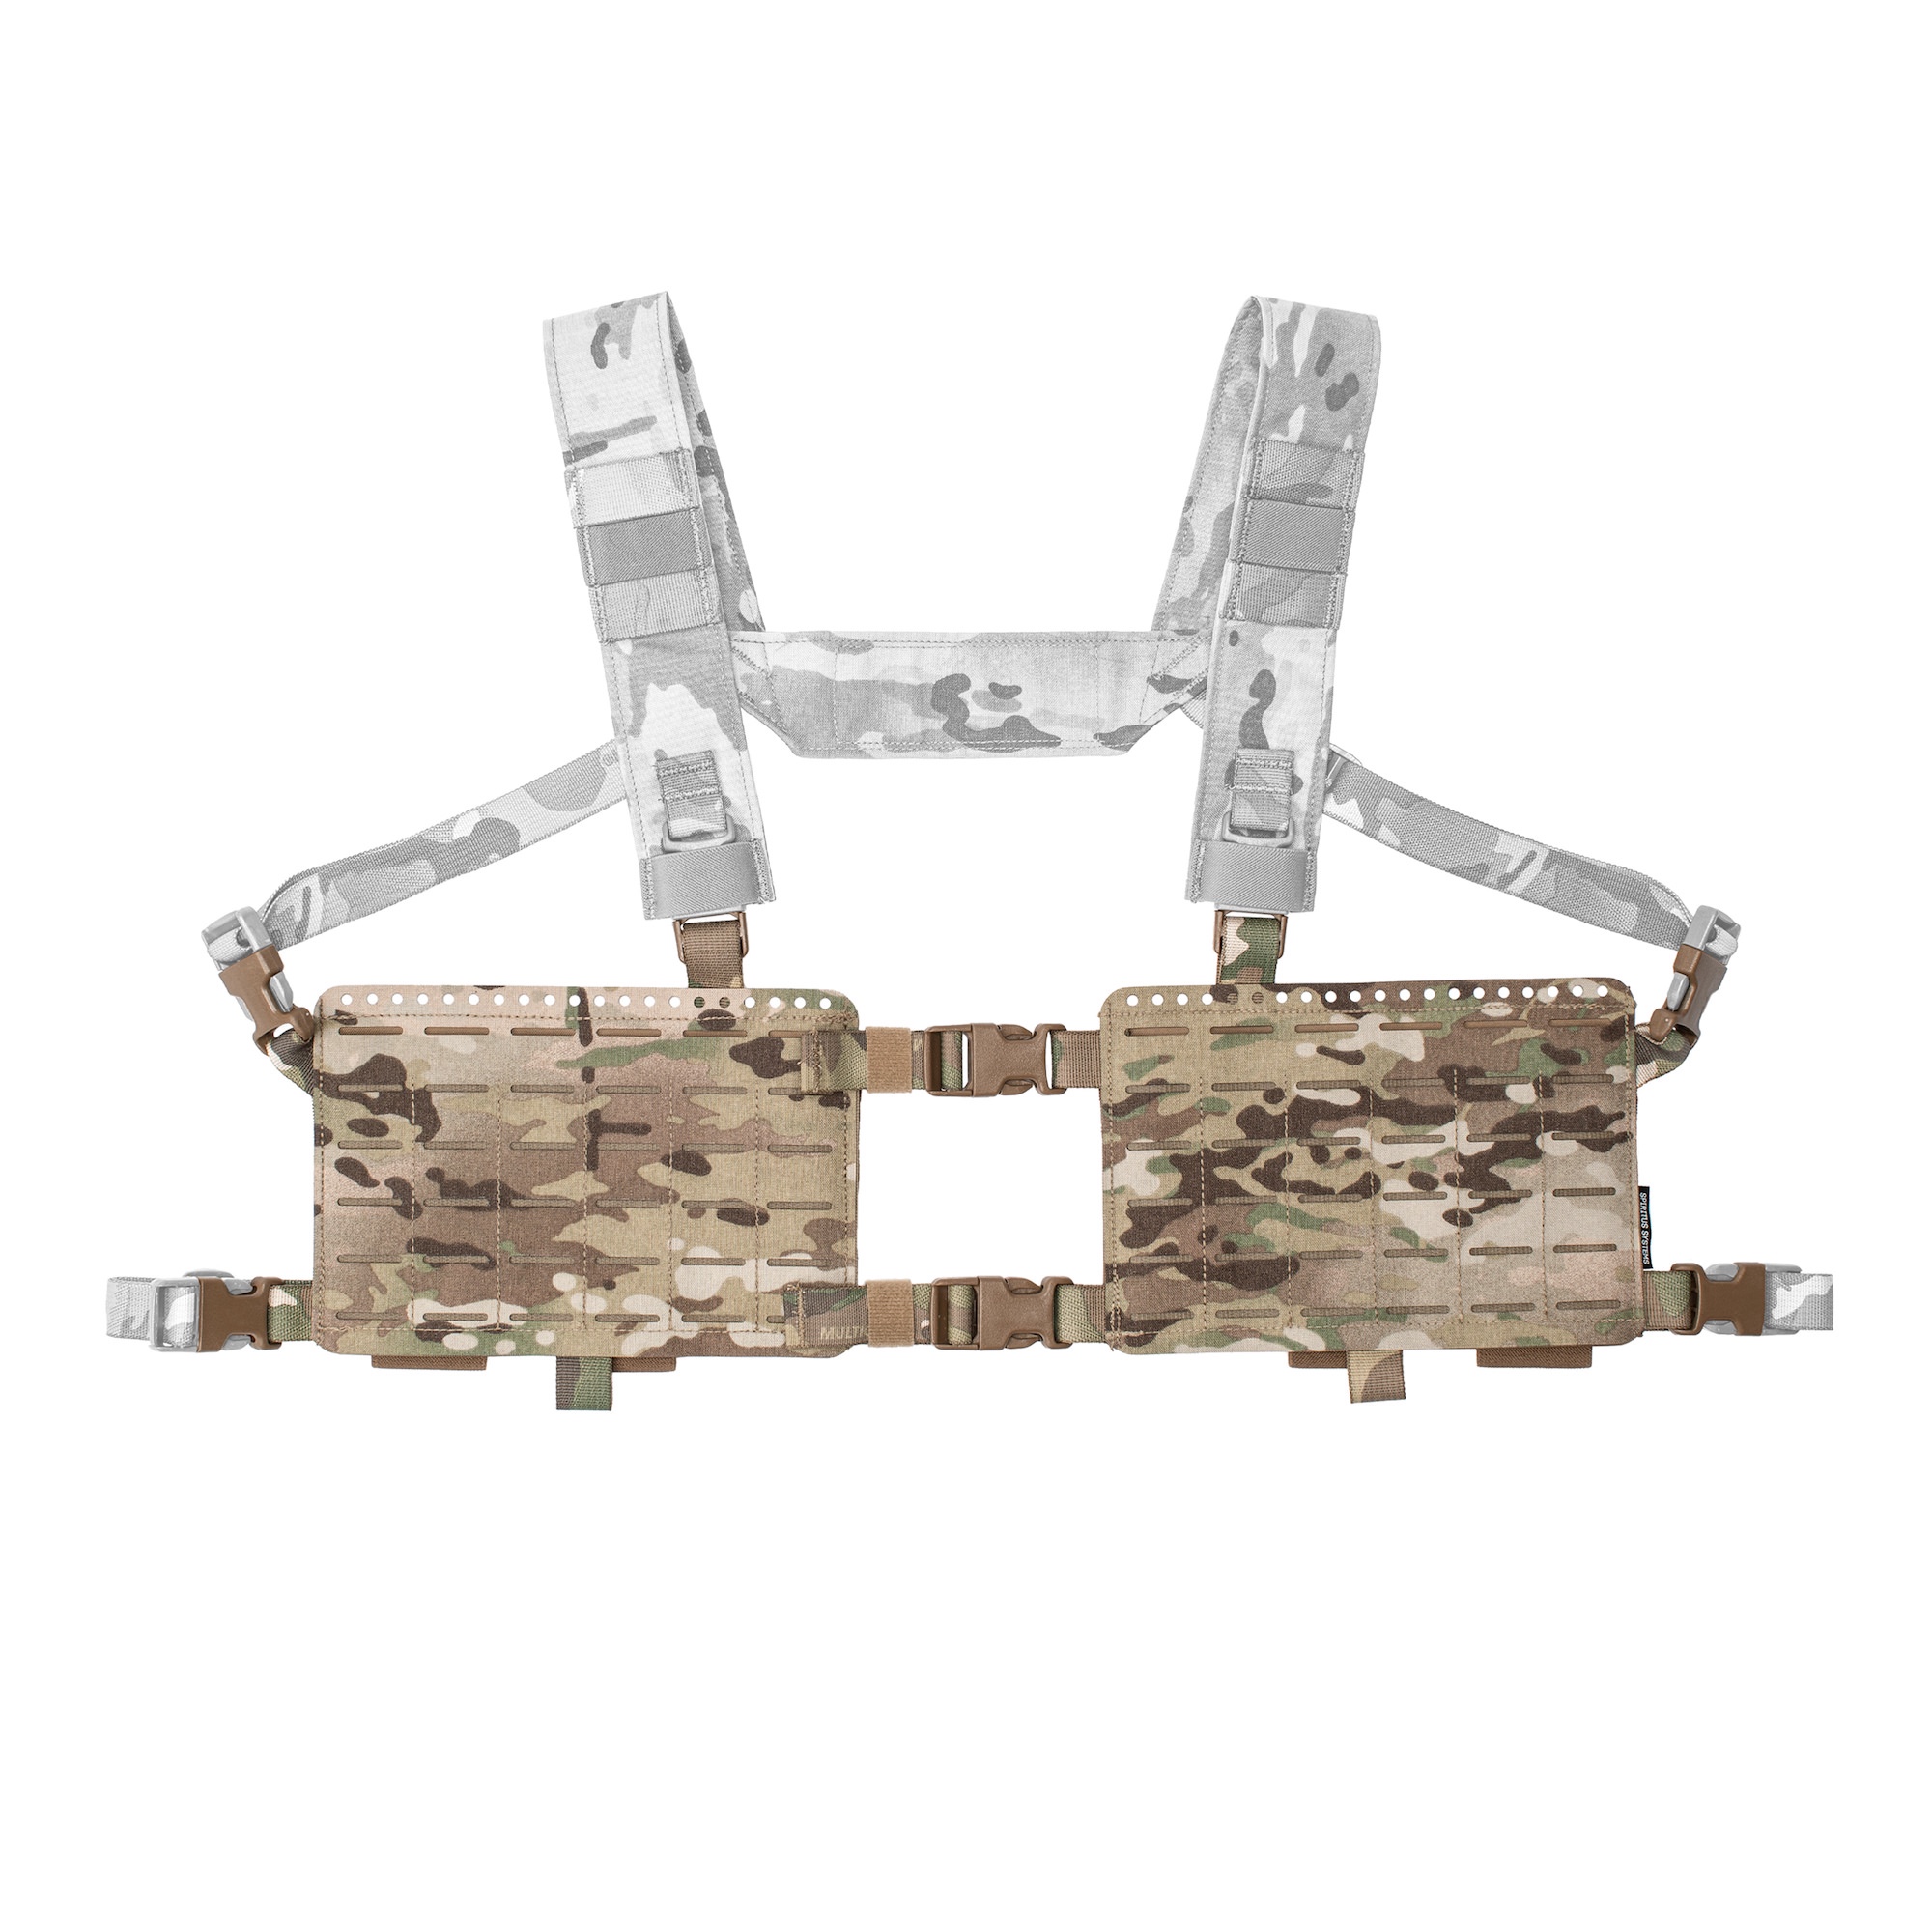 Spiritus Systems Releases the 34 Alpha Split Chest Rig Chassis